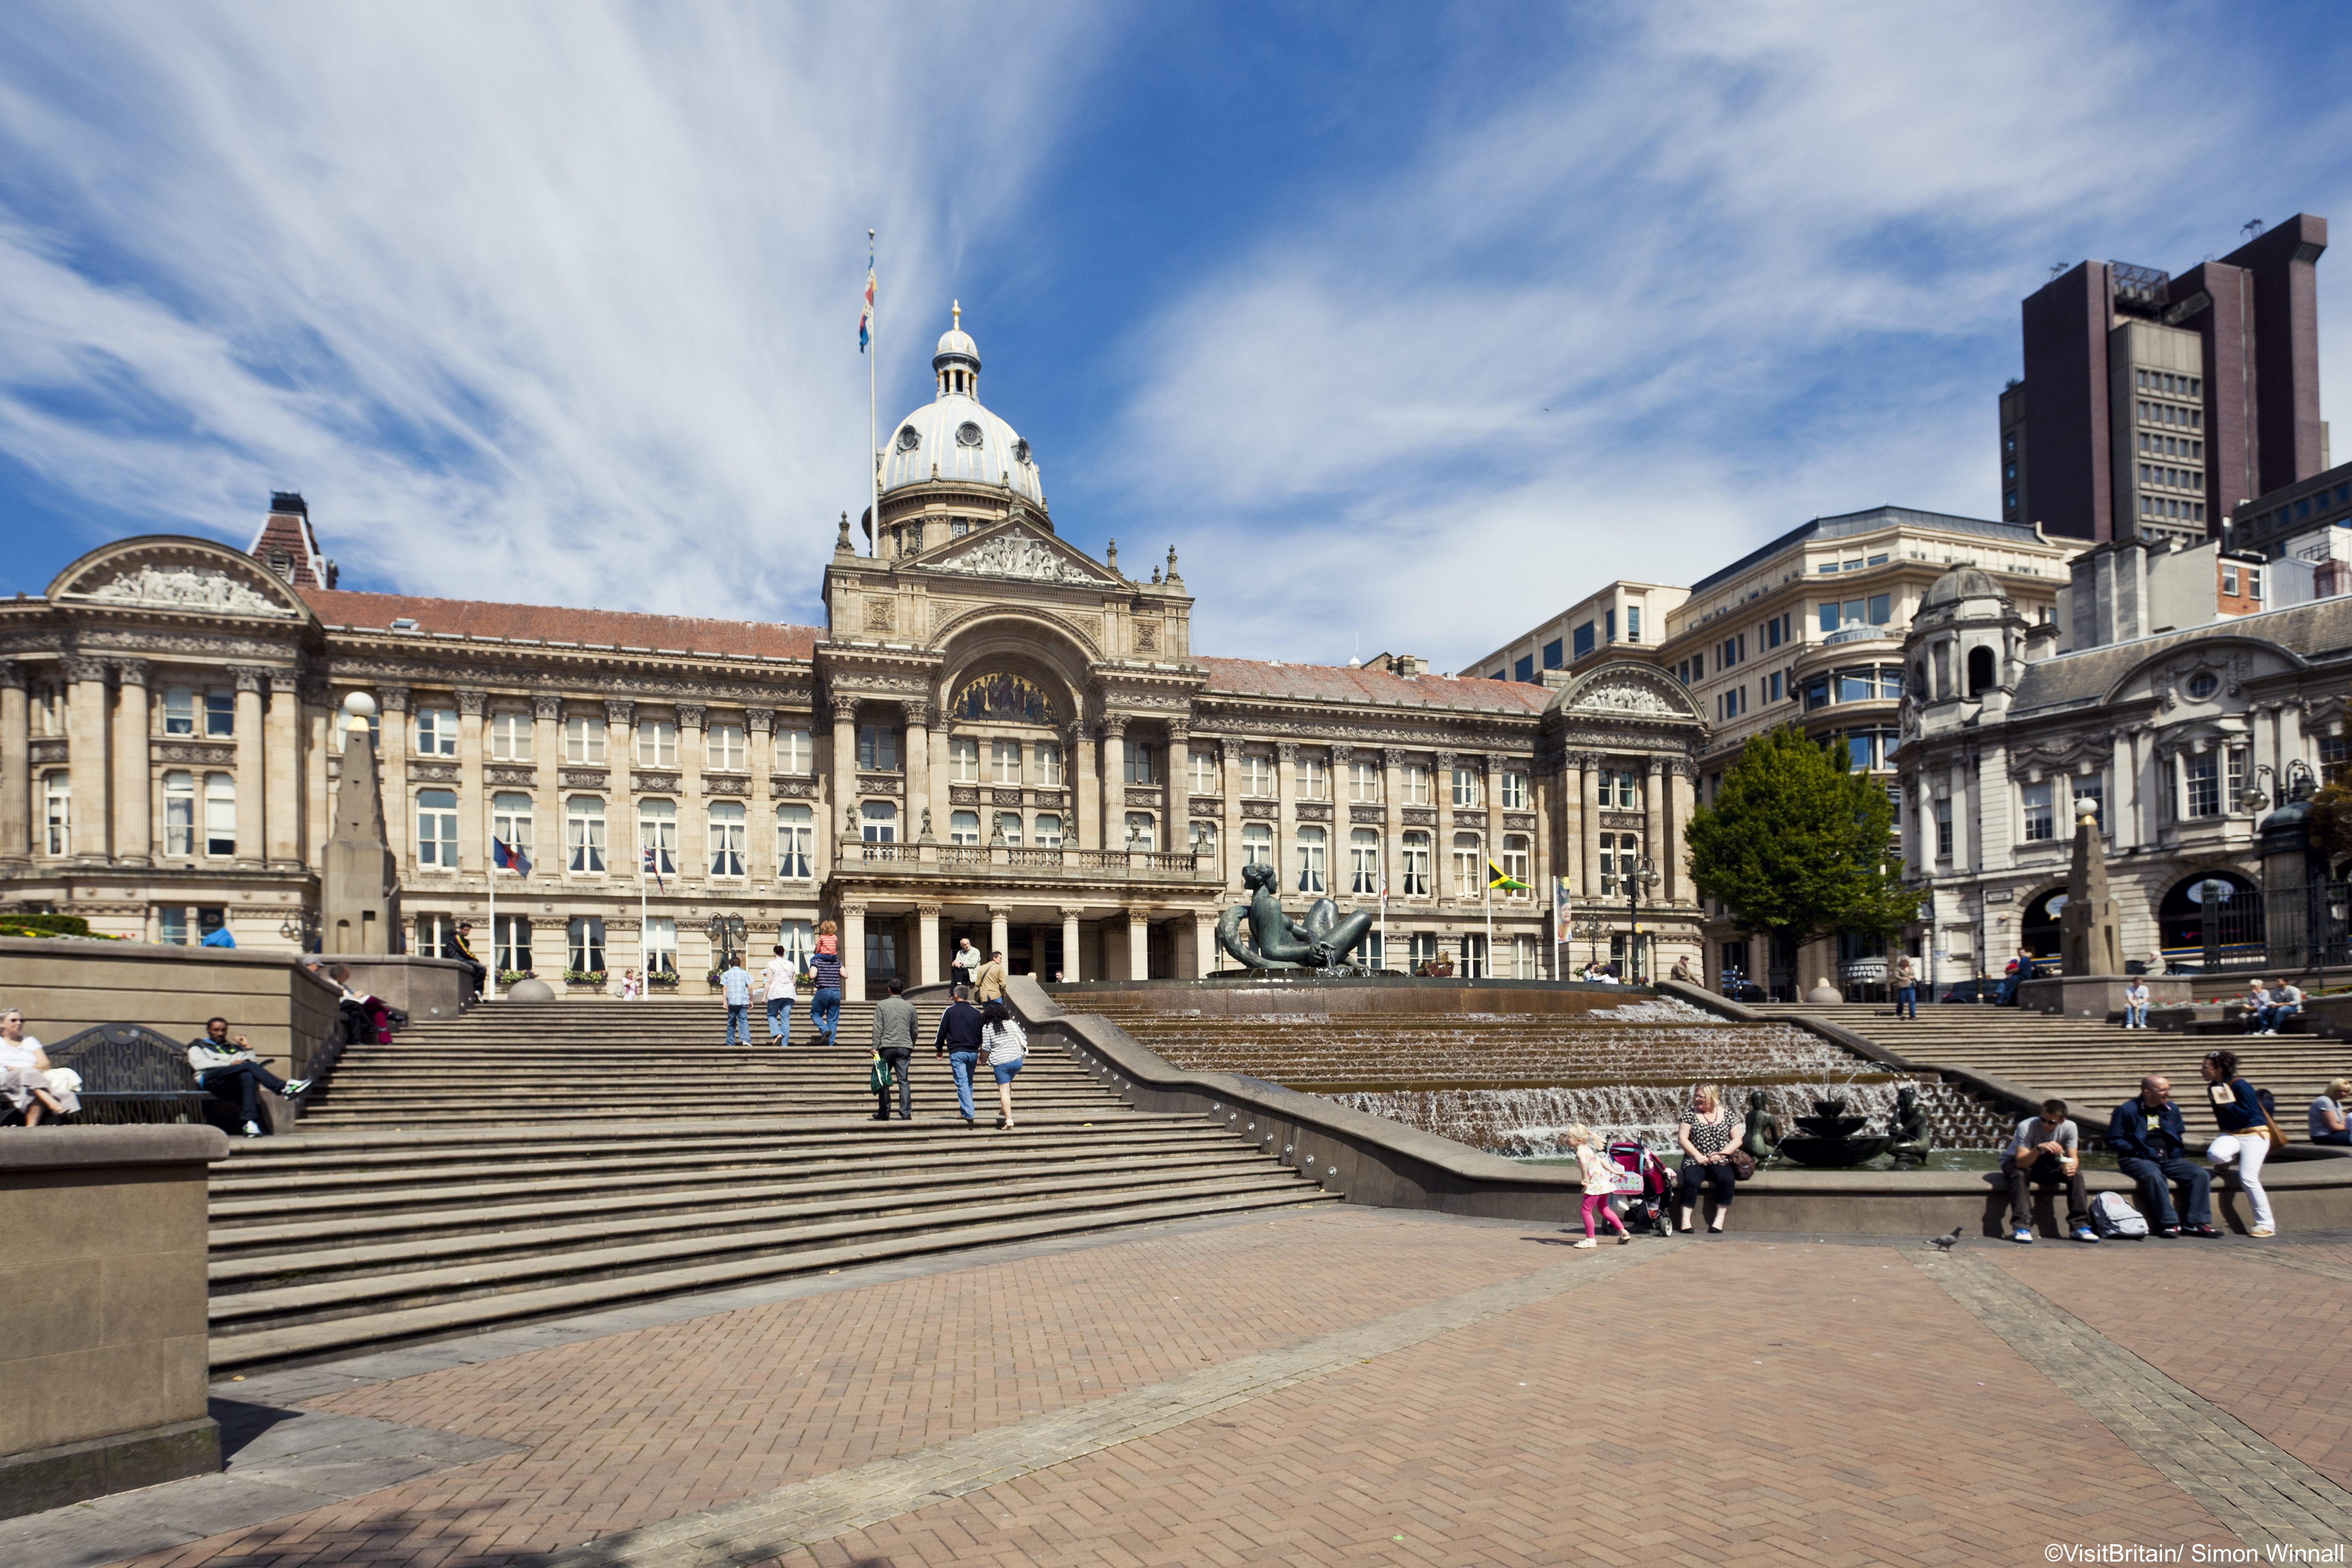 Birmingham city centre has historic buildings such as the City Council House built in the late 19th century, in Victoria Square